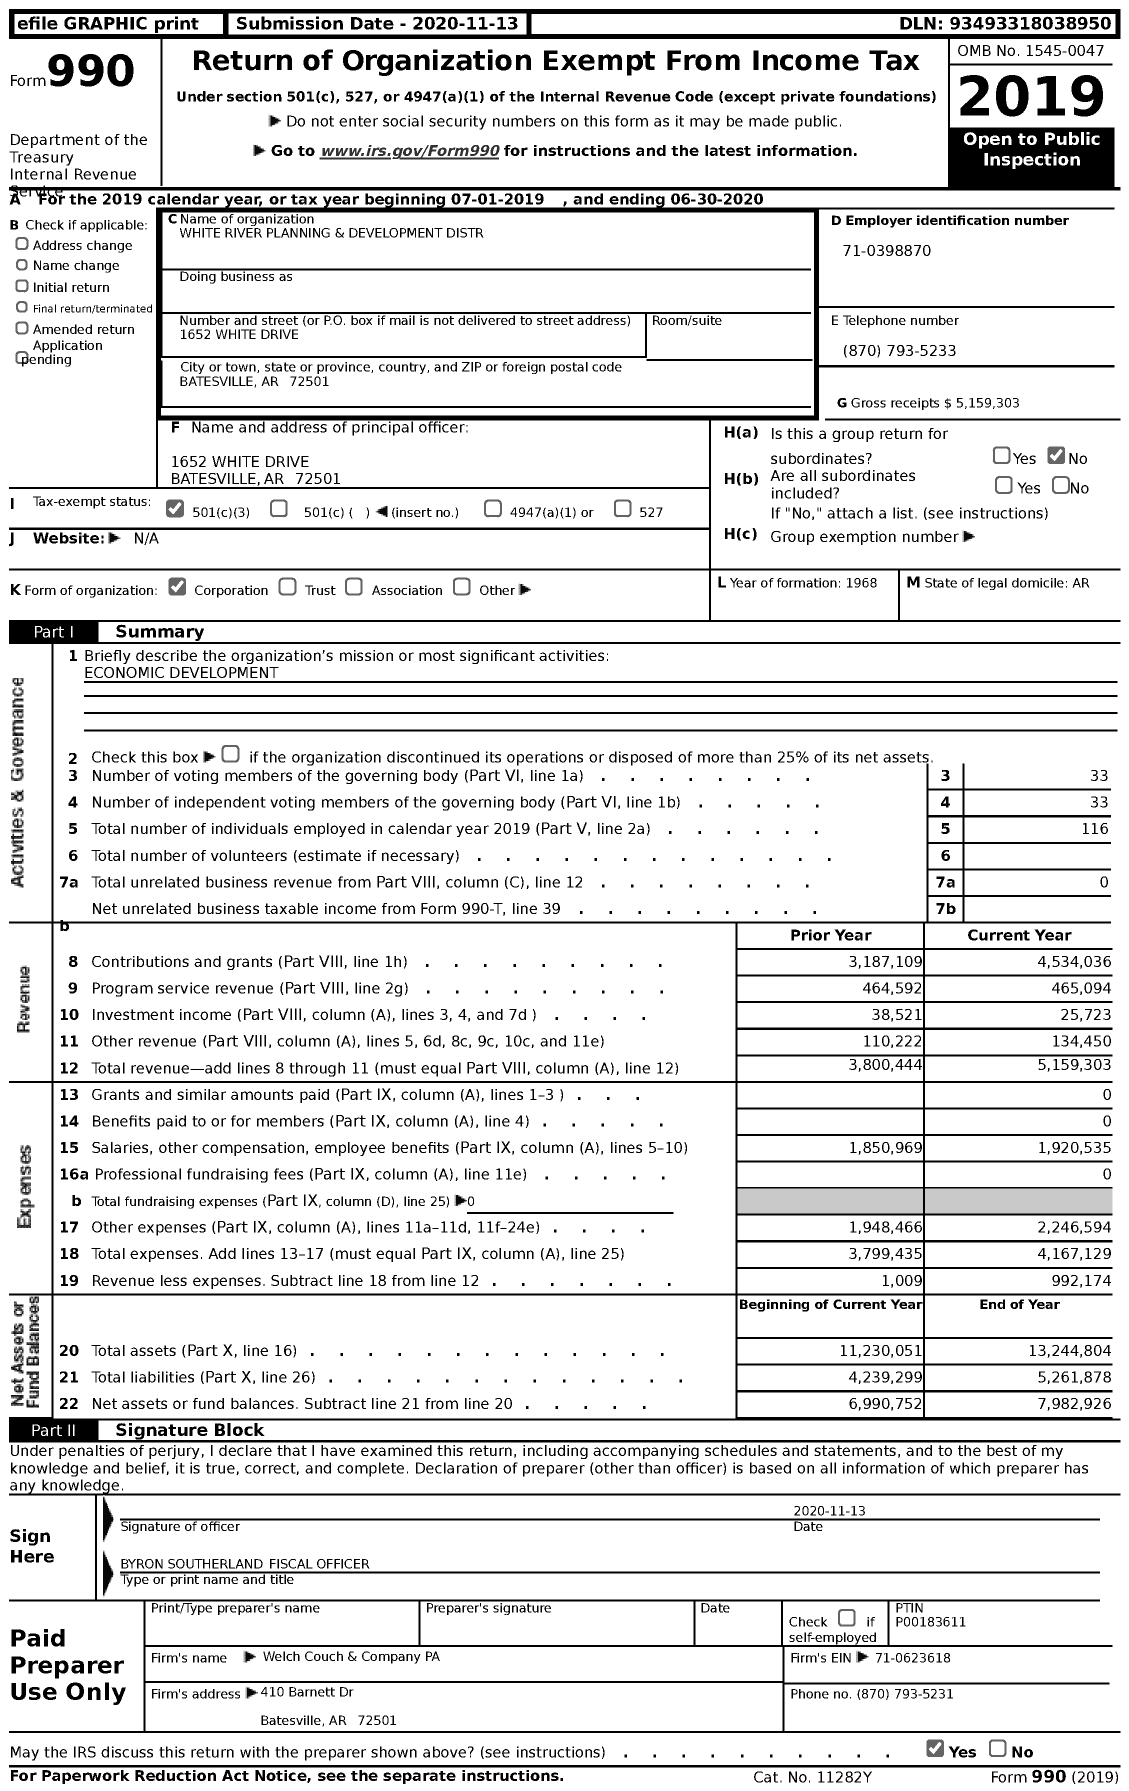 Image of first page of 2019 Form 990 for White River Planning & Development Distribution (WRPDD)